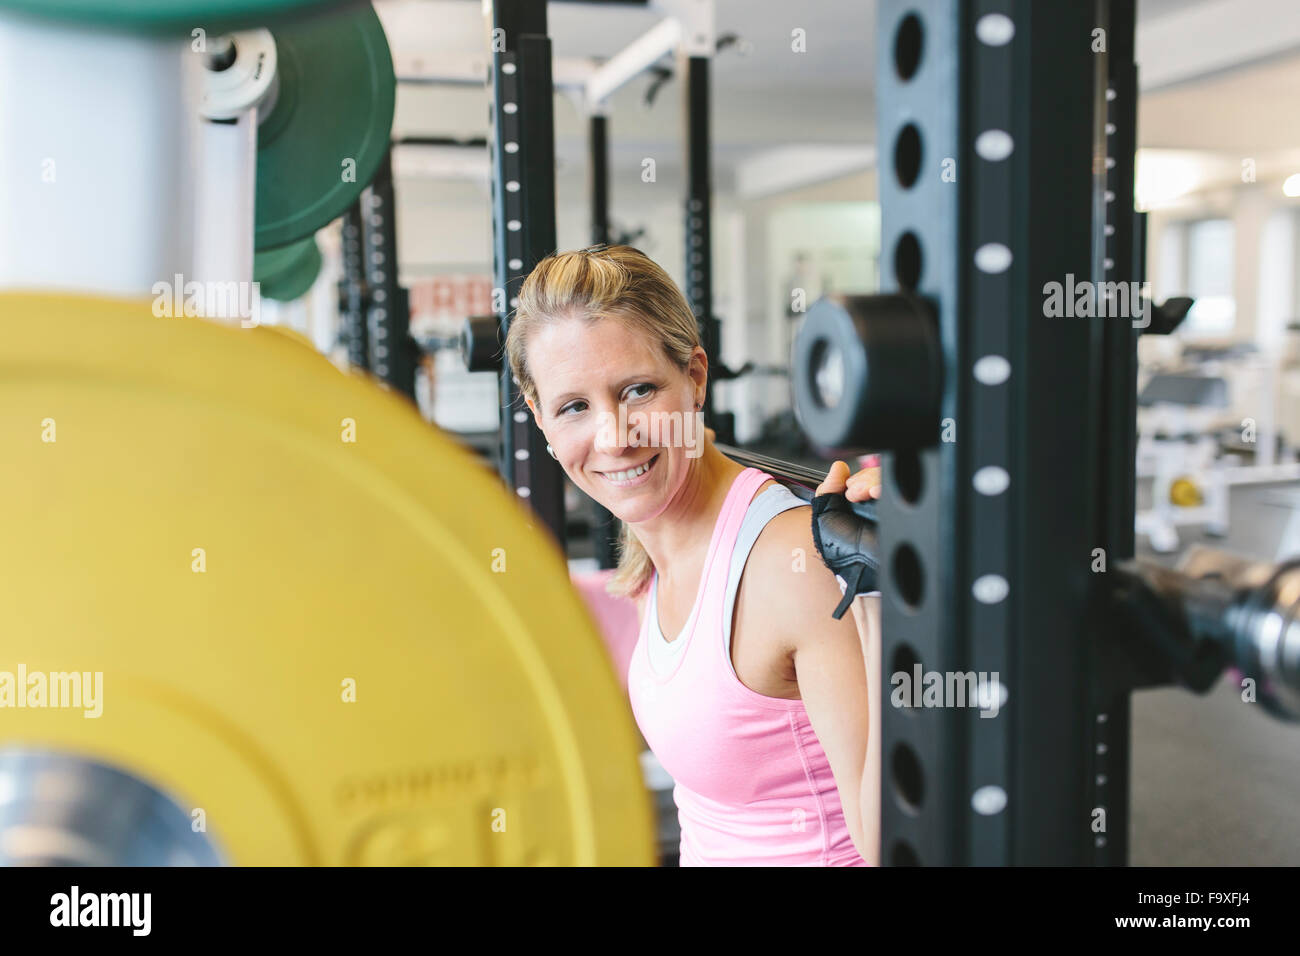 Smiling woman doing barbell squats in a power rack Stock Photo